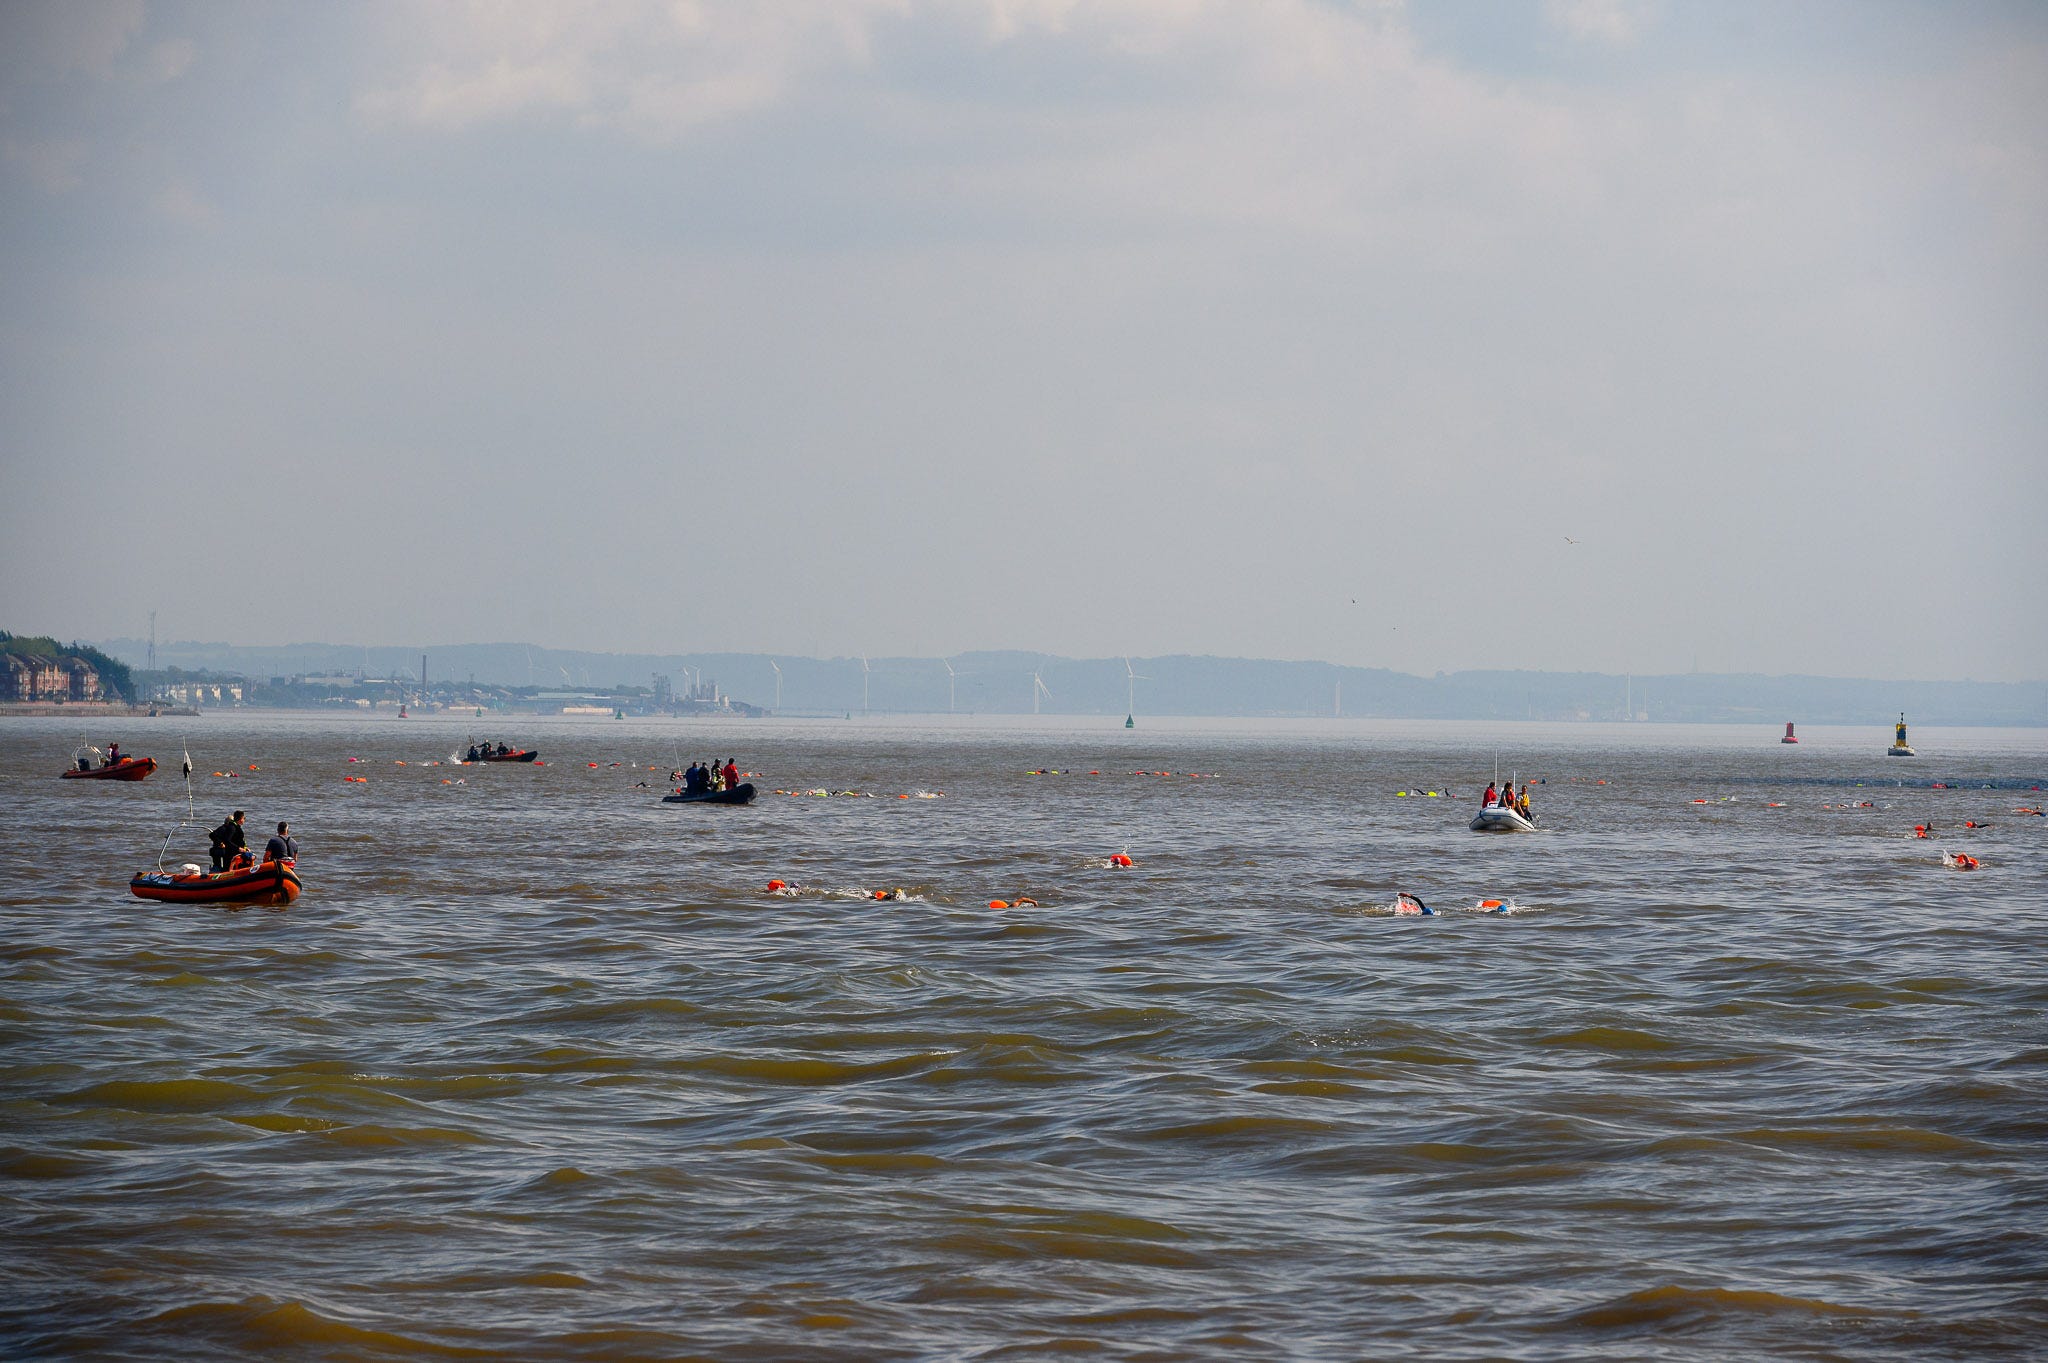 Orange dots in the water are toe floats from swimmers. There are hills way off in the distance.